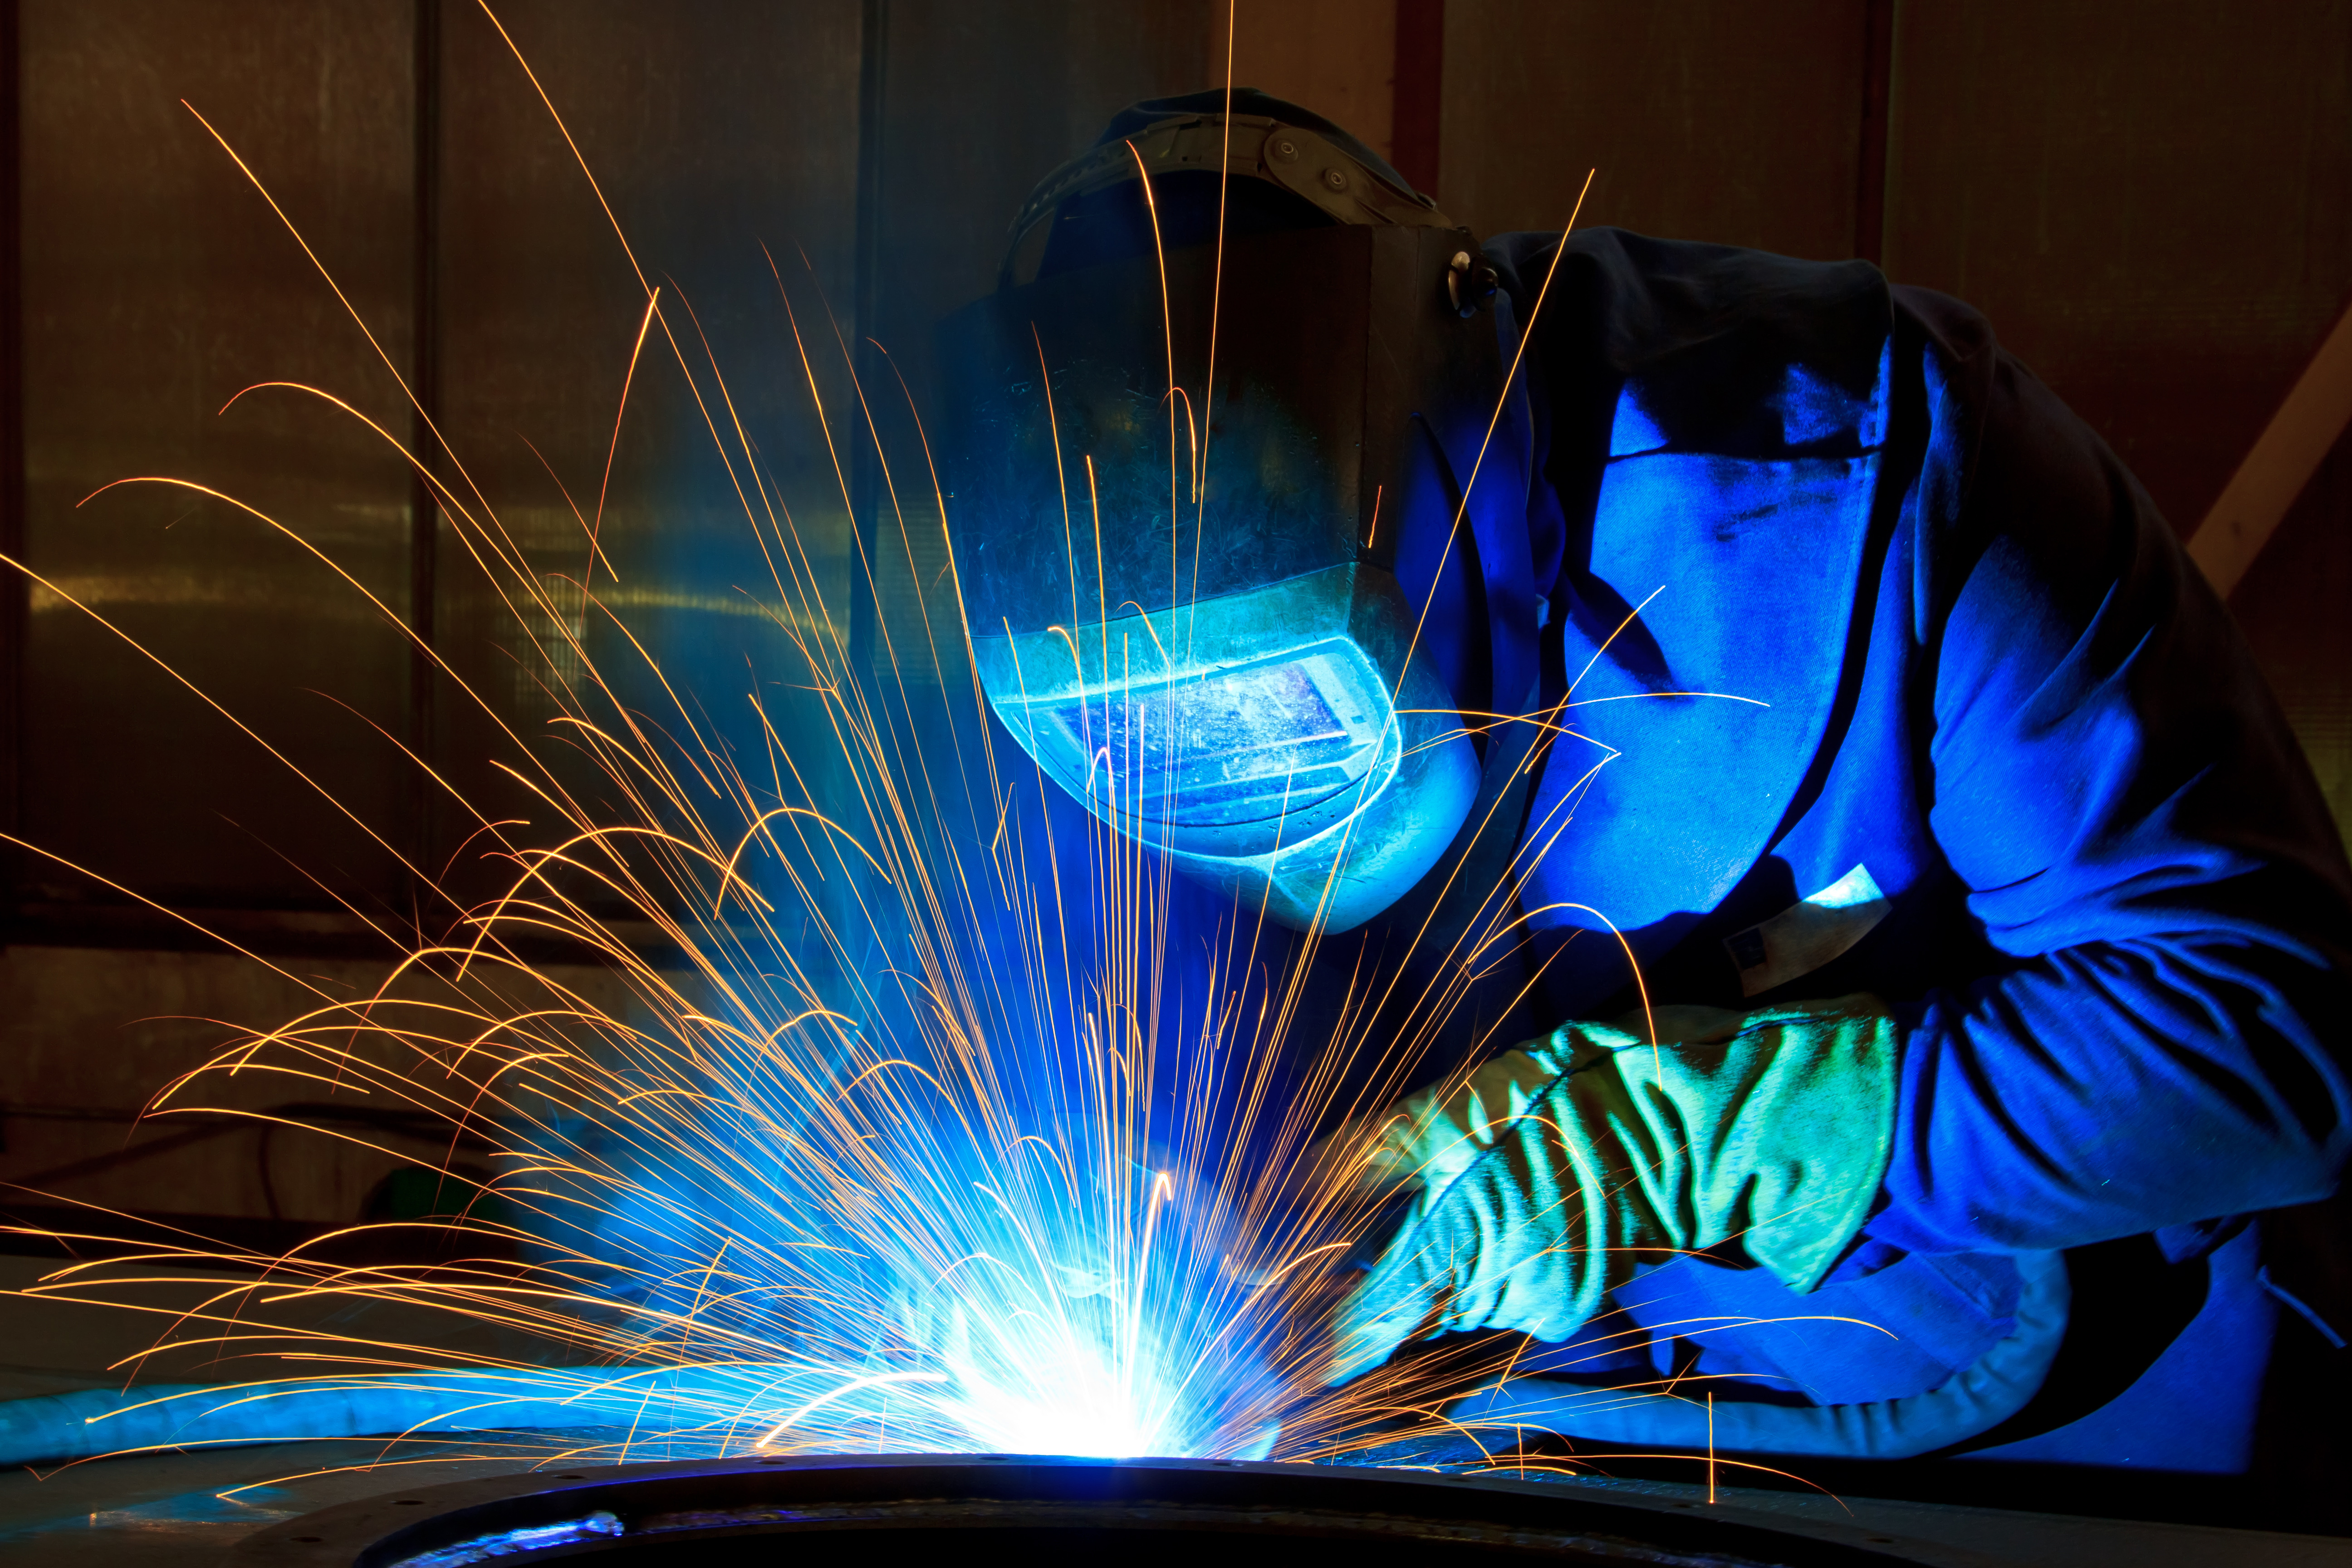 Welder at an industrial facility